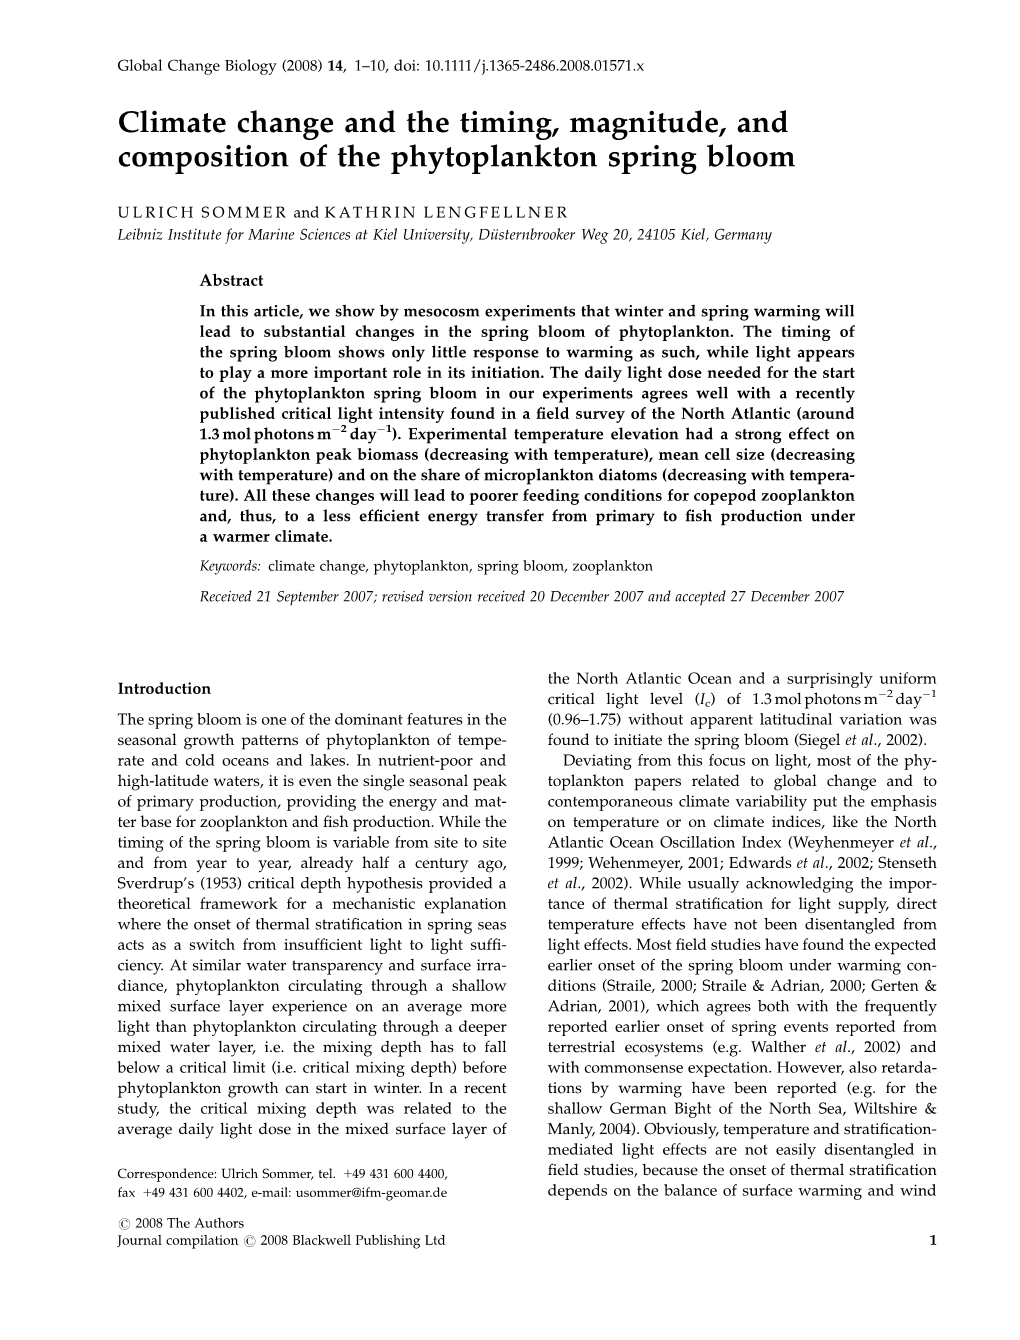 Climate Change and the Timing, Magnitude, and Composition of the Phytoplankton Spring Bloom